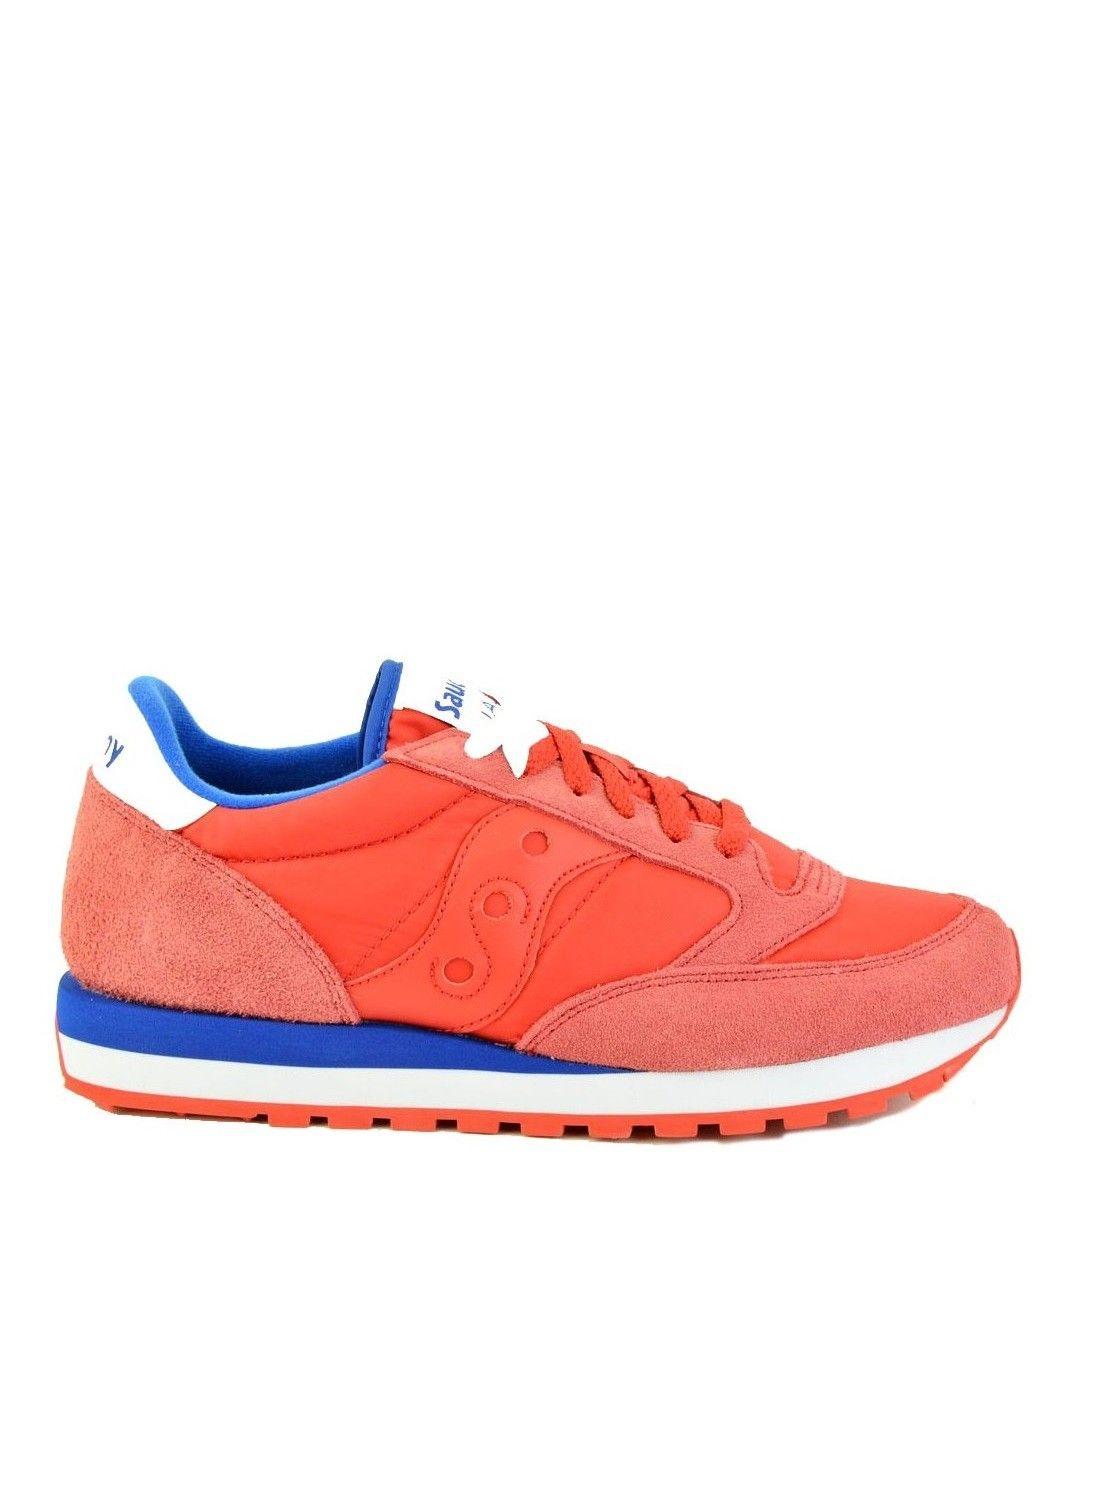 Saucony Red Suede Sneakers for Men - Lyst